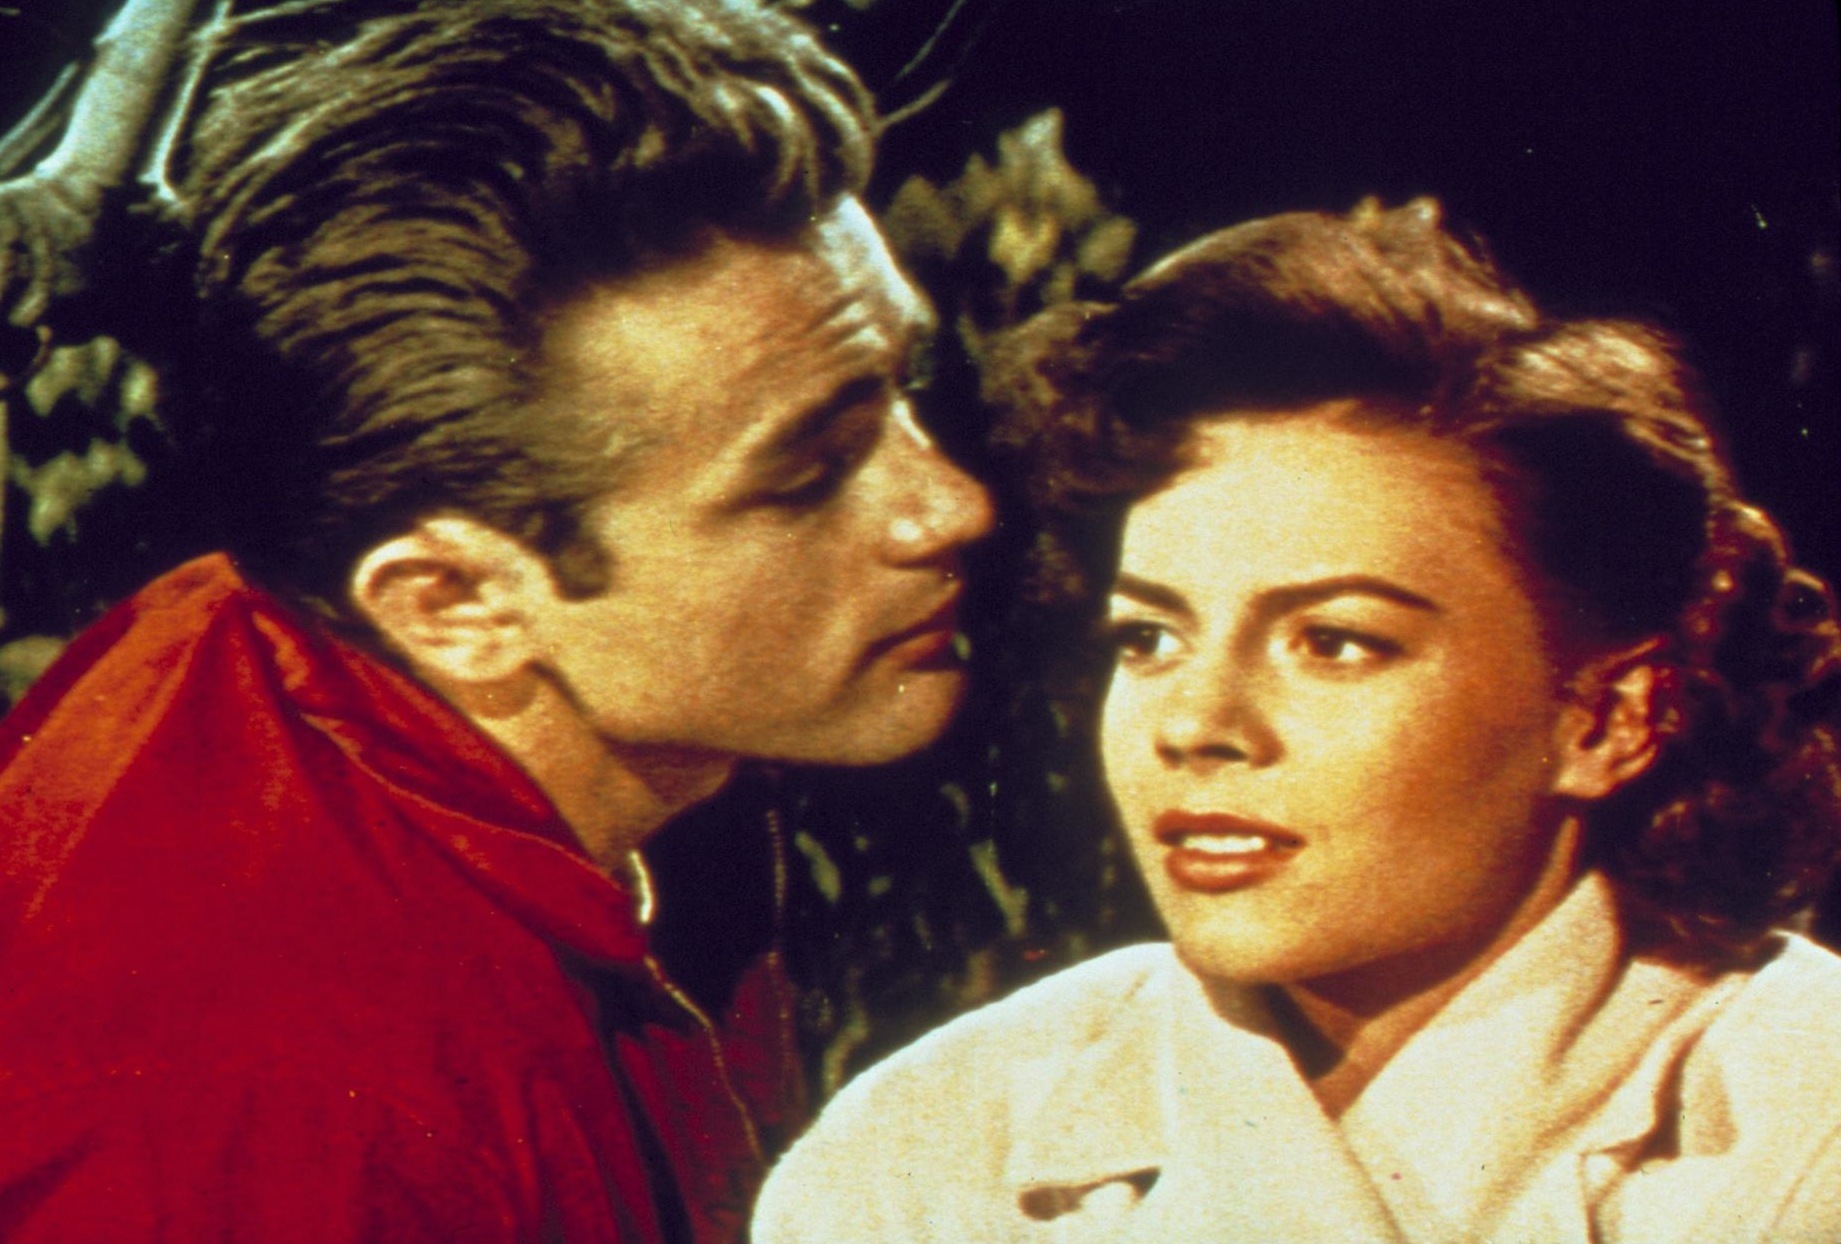 Still of James Dean and Natalie Wood in Rebel Without a Cause (1955)